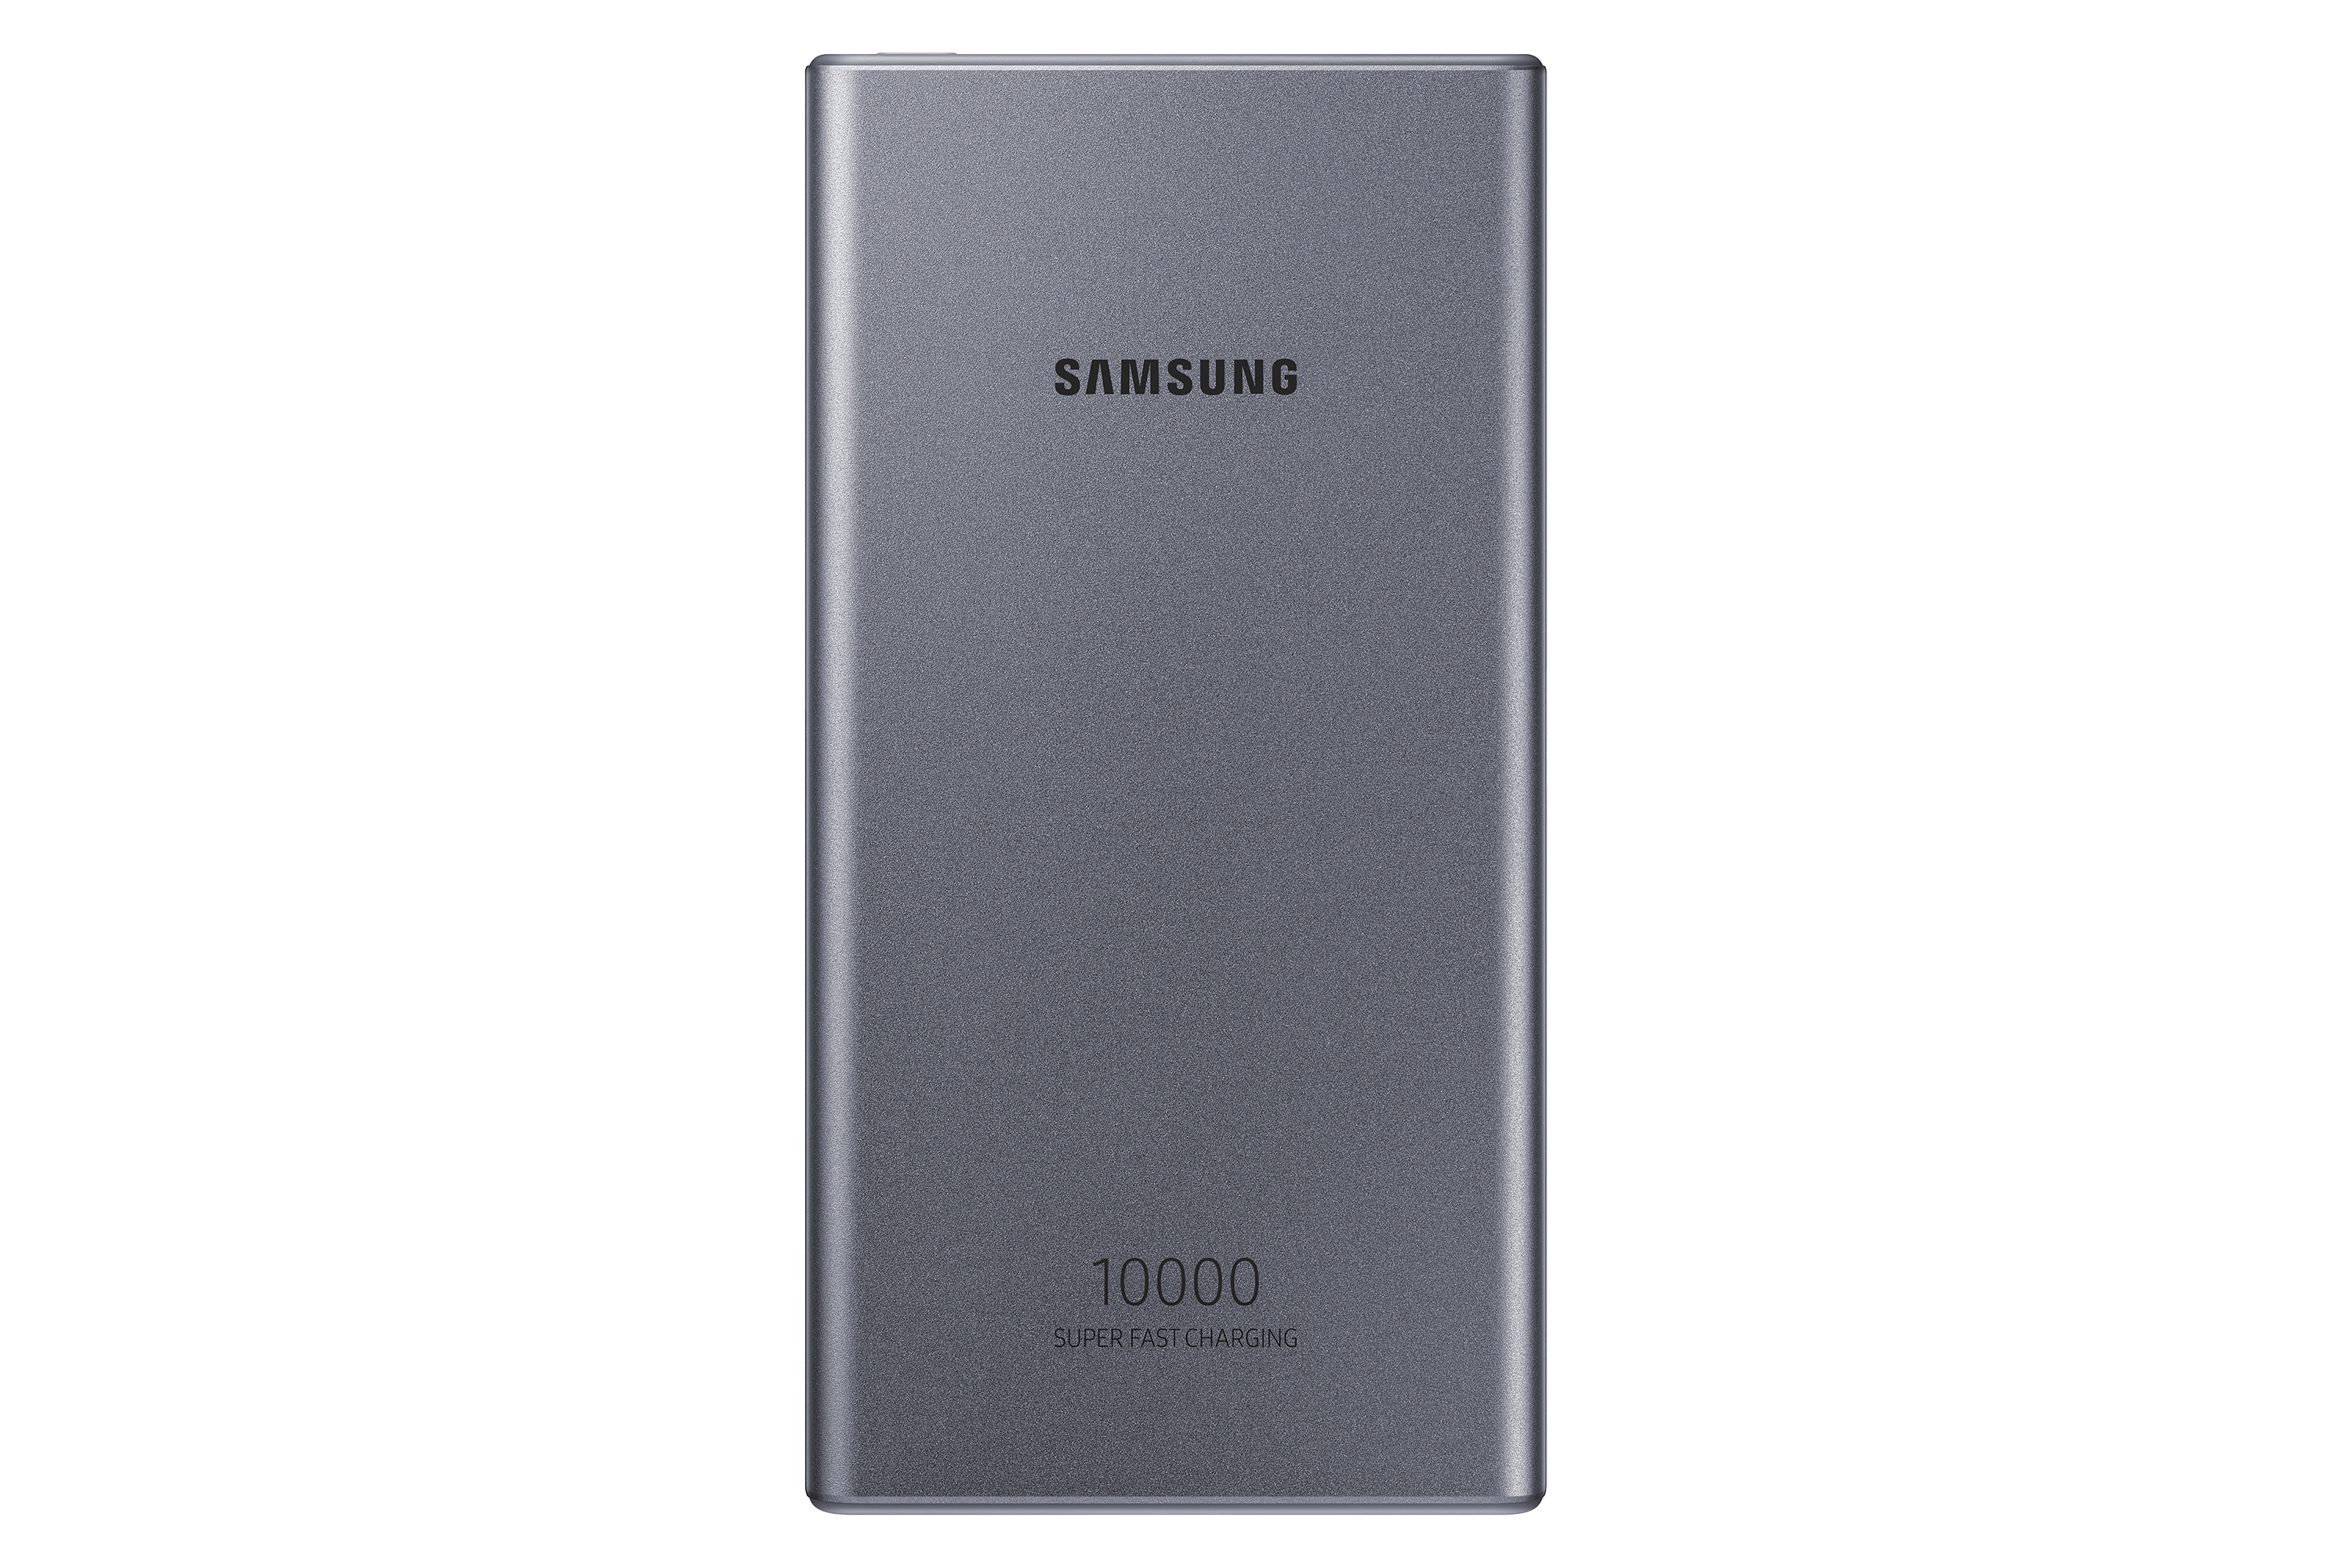 25w Portable Battery Silver Mobile Accessories Eb P3300xjegus Samsung Us